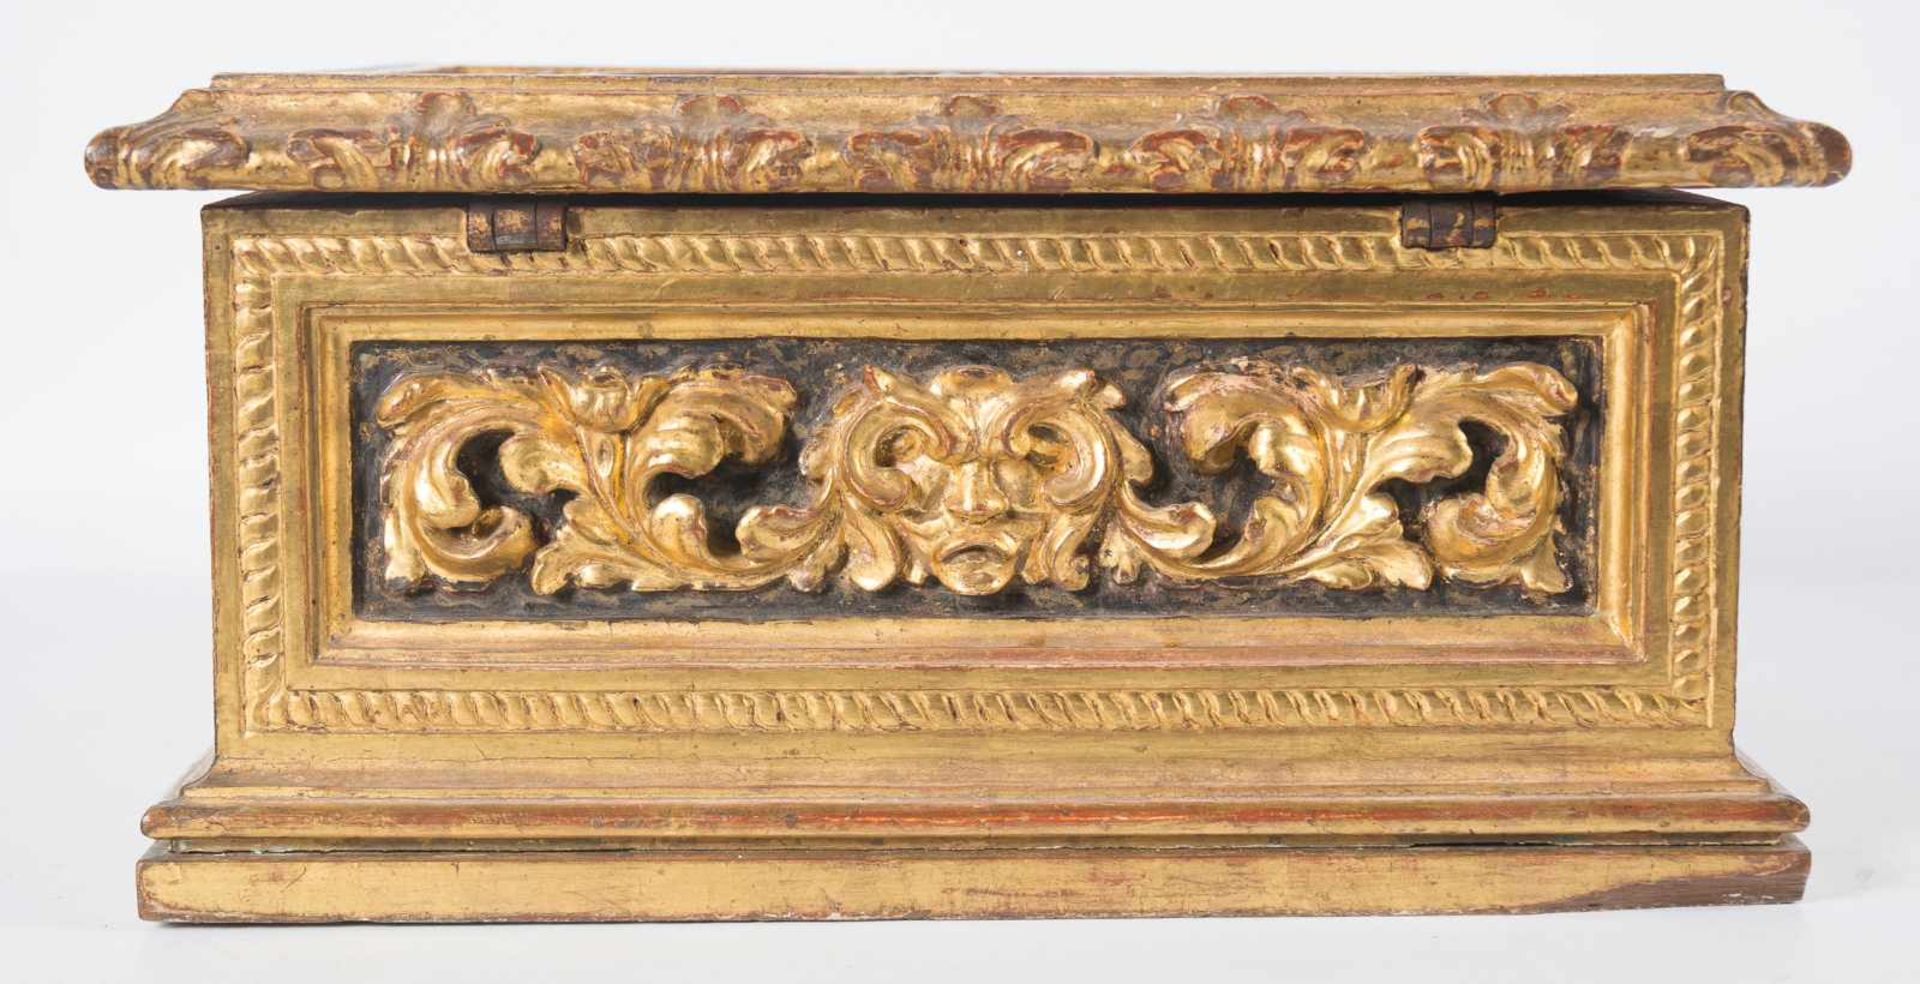 Carved and gilded Spanish wooden chest. 16th century. - Bild 5 aus 8